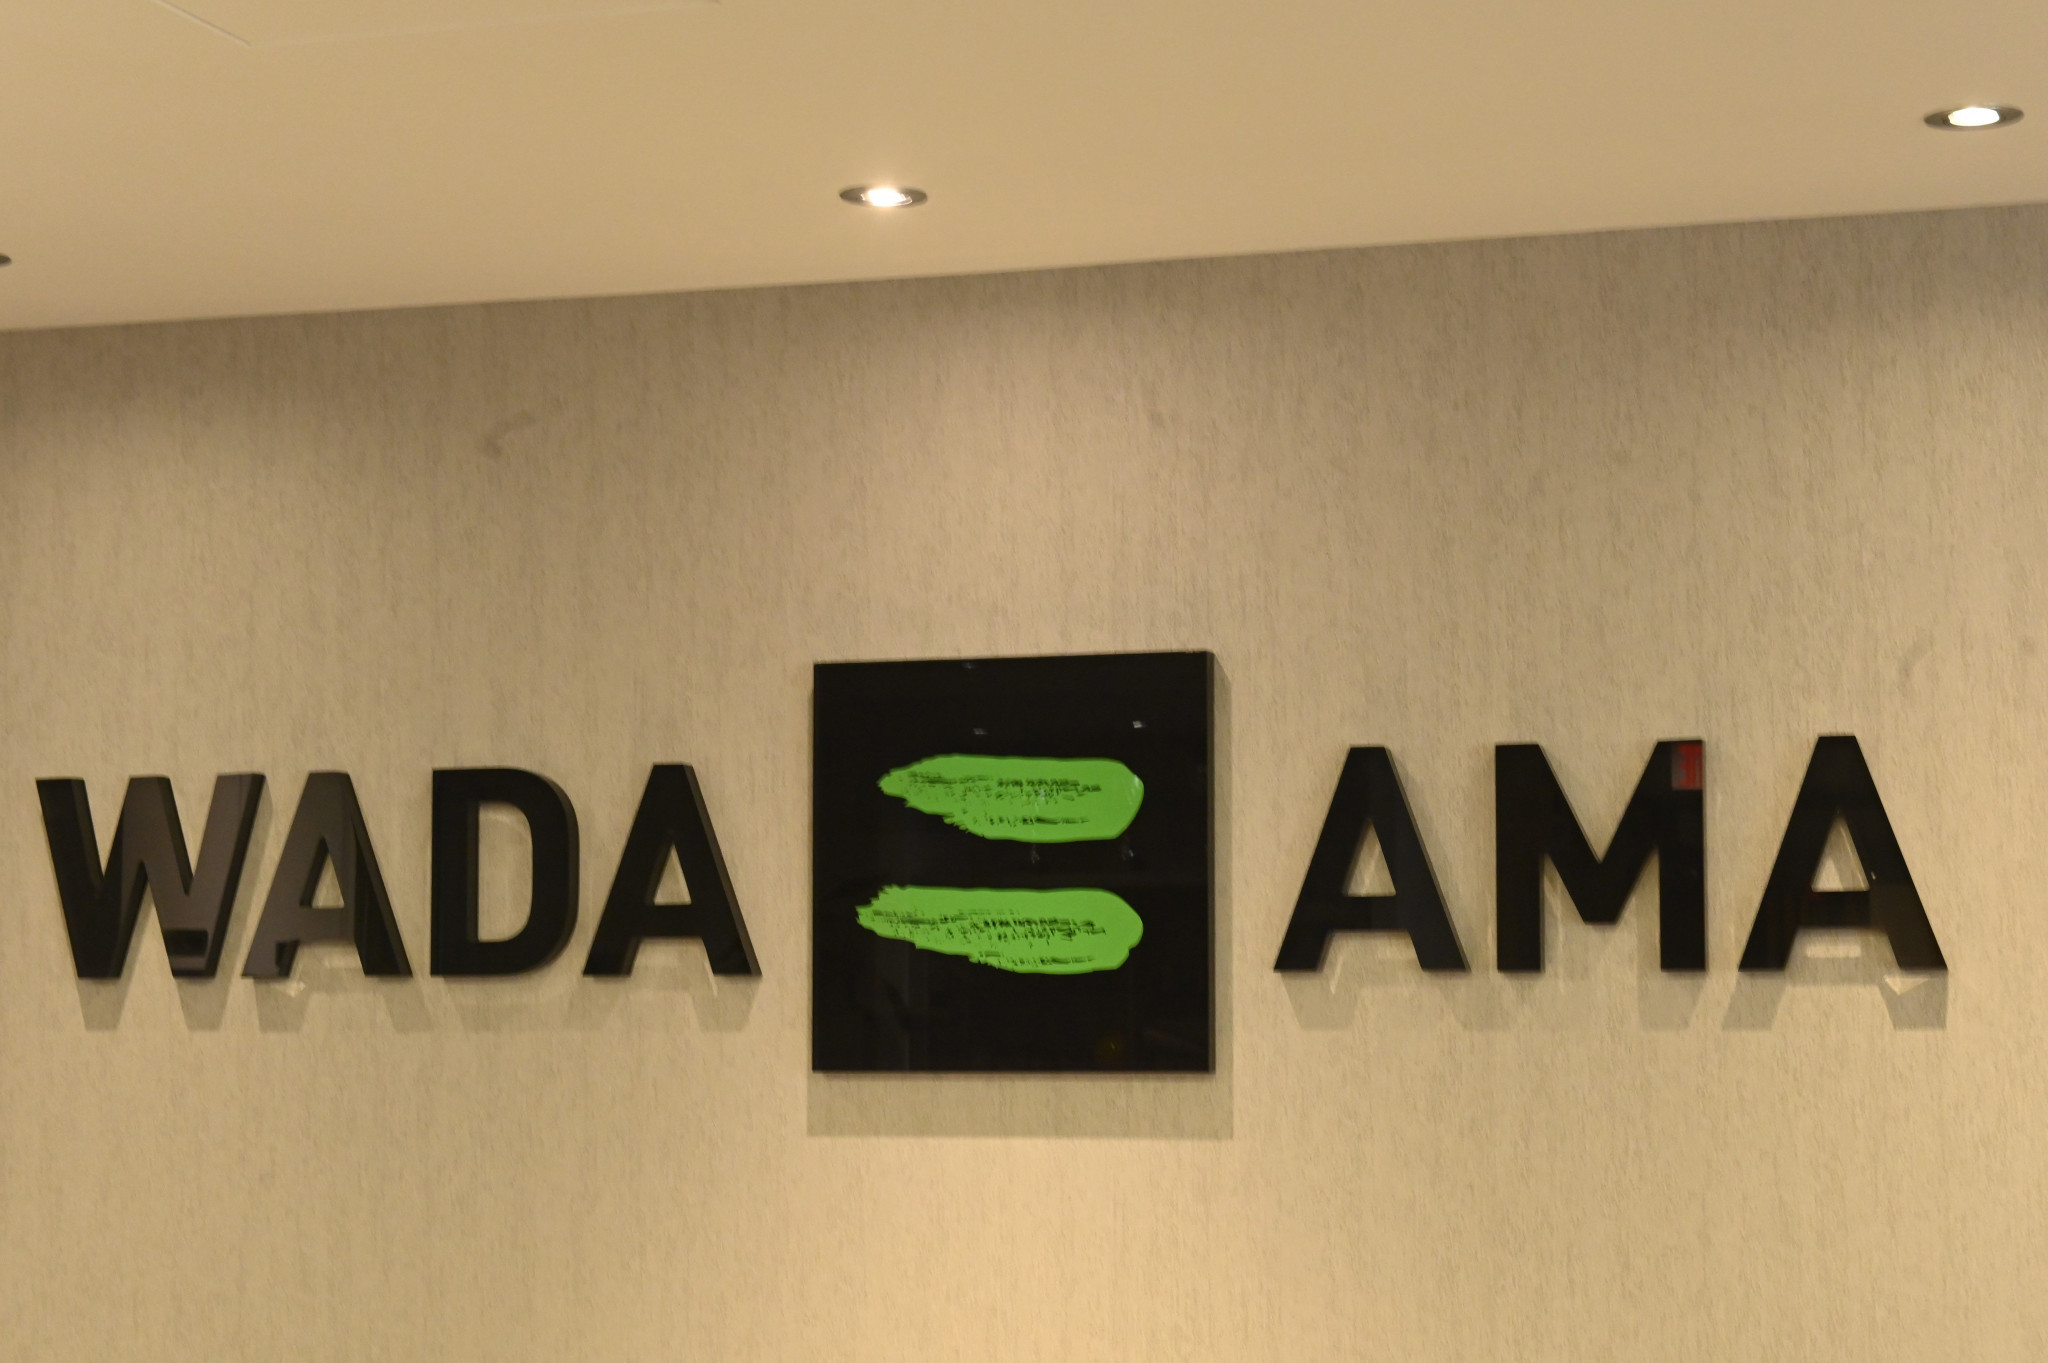 WADA seeks seven members for Independent Ethics Board to implement Code of Ethics